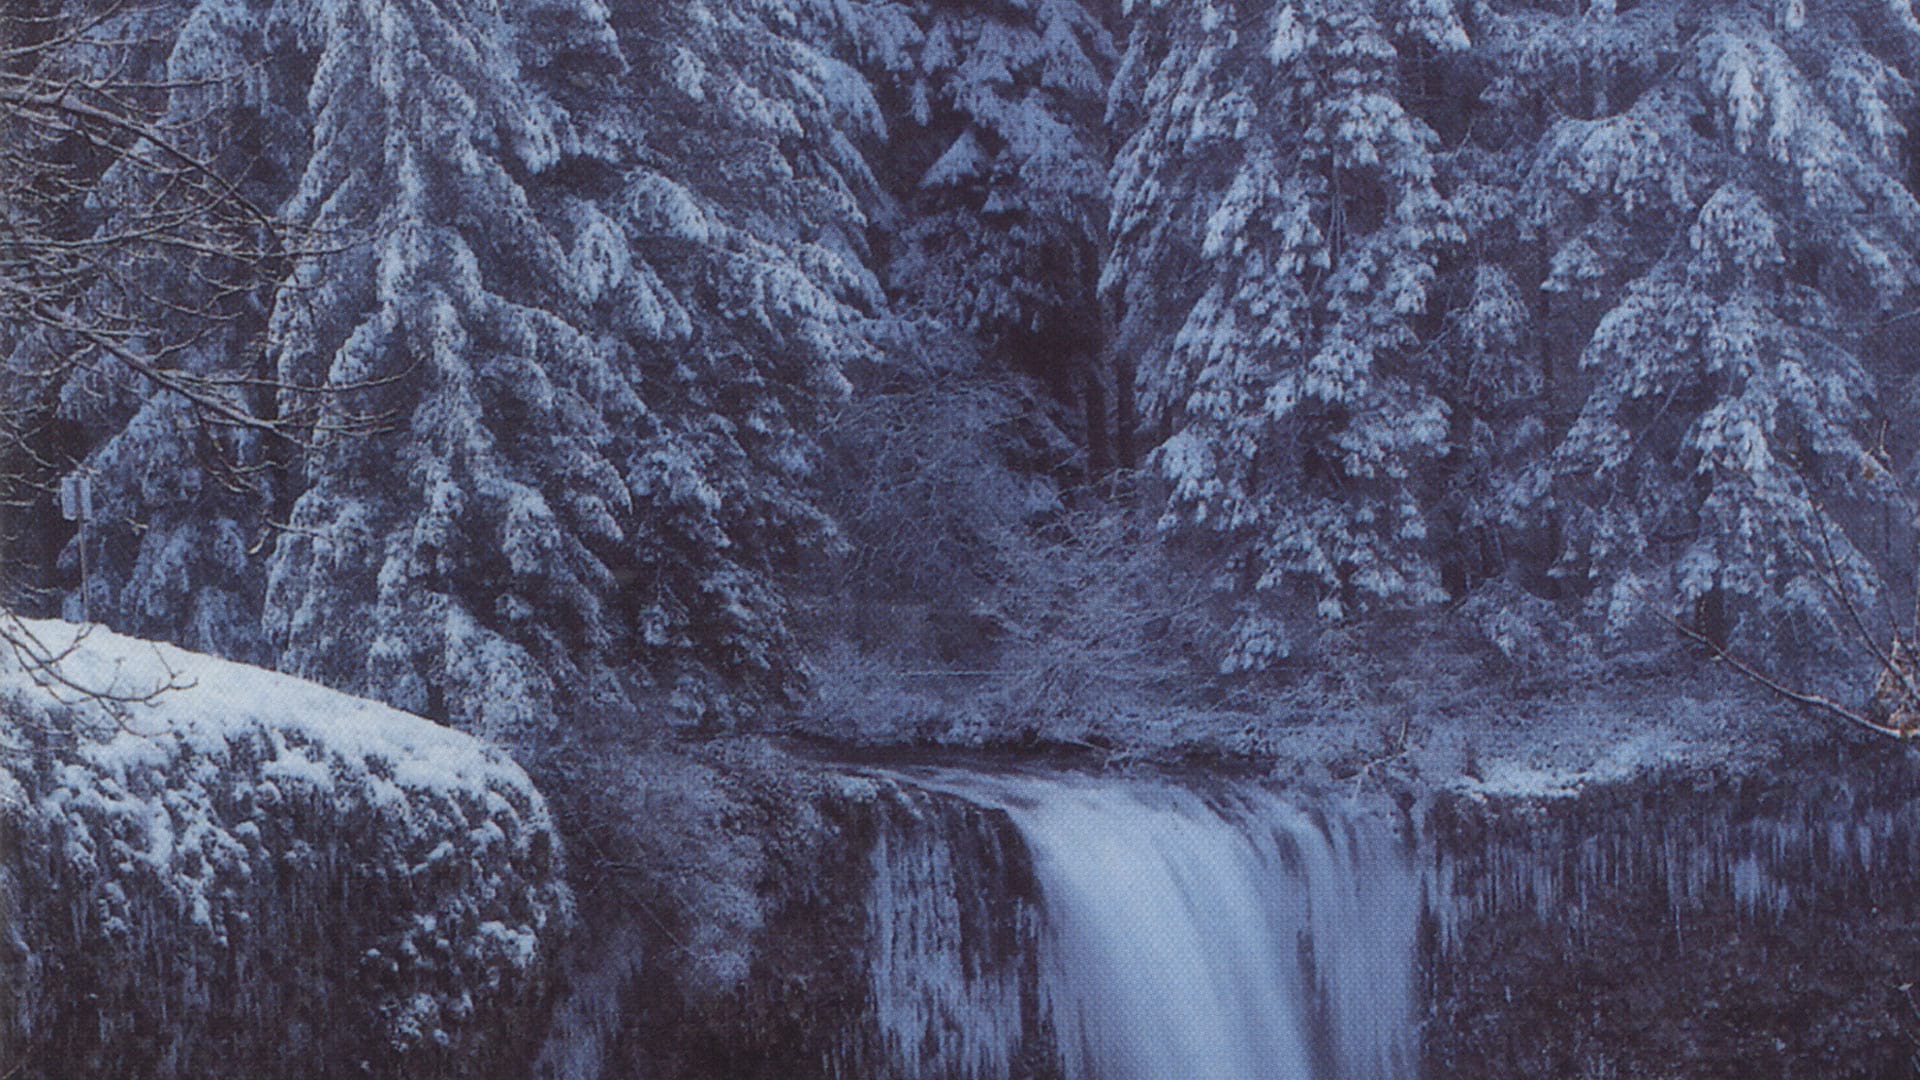 22 Years Ago: ANCIENT WISDOM release For Snow Covered the Northland